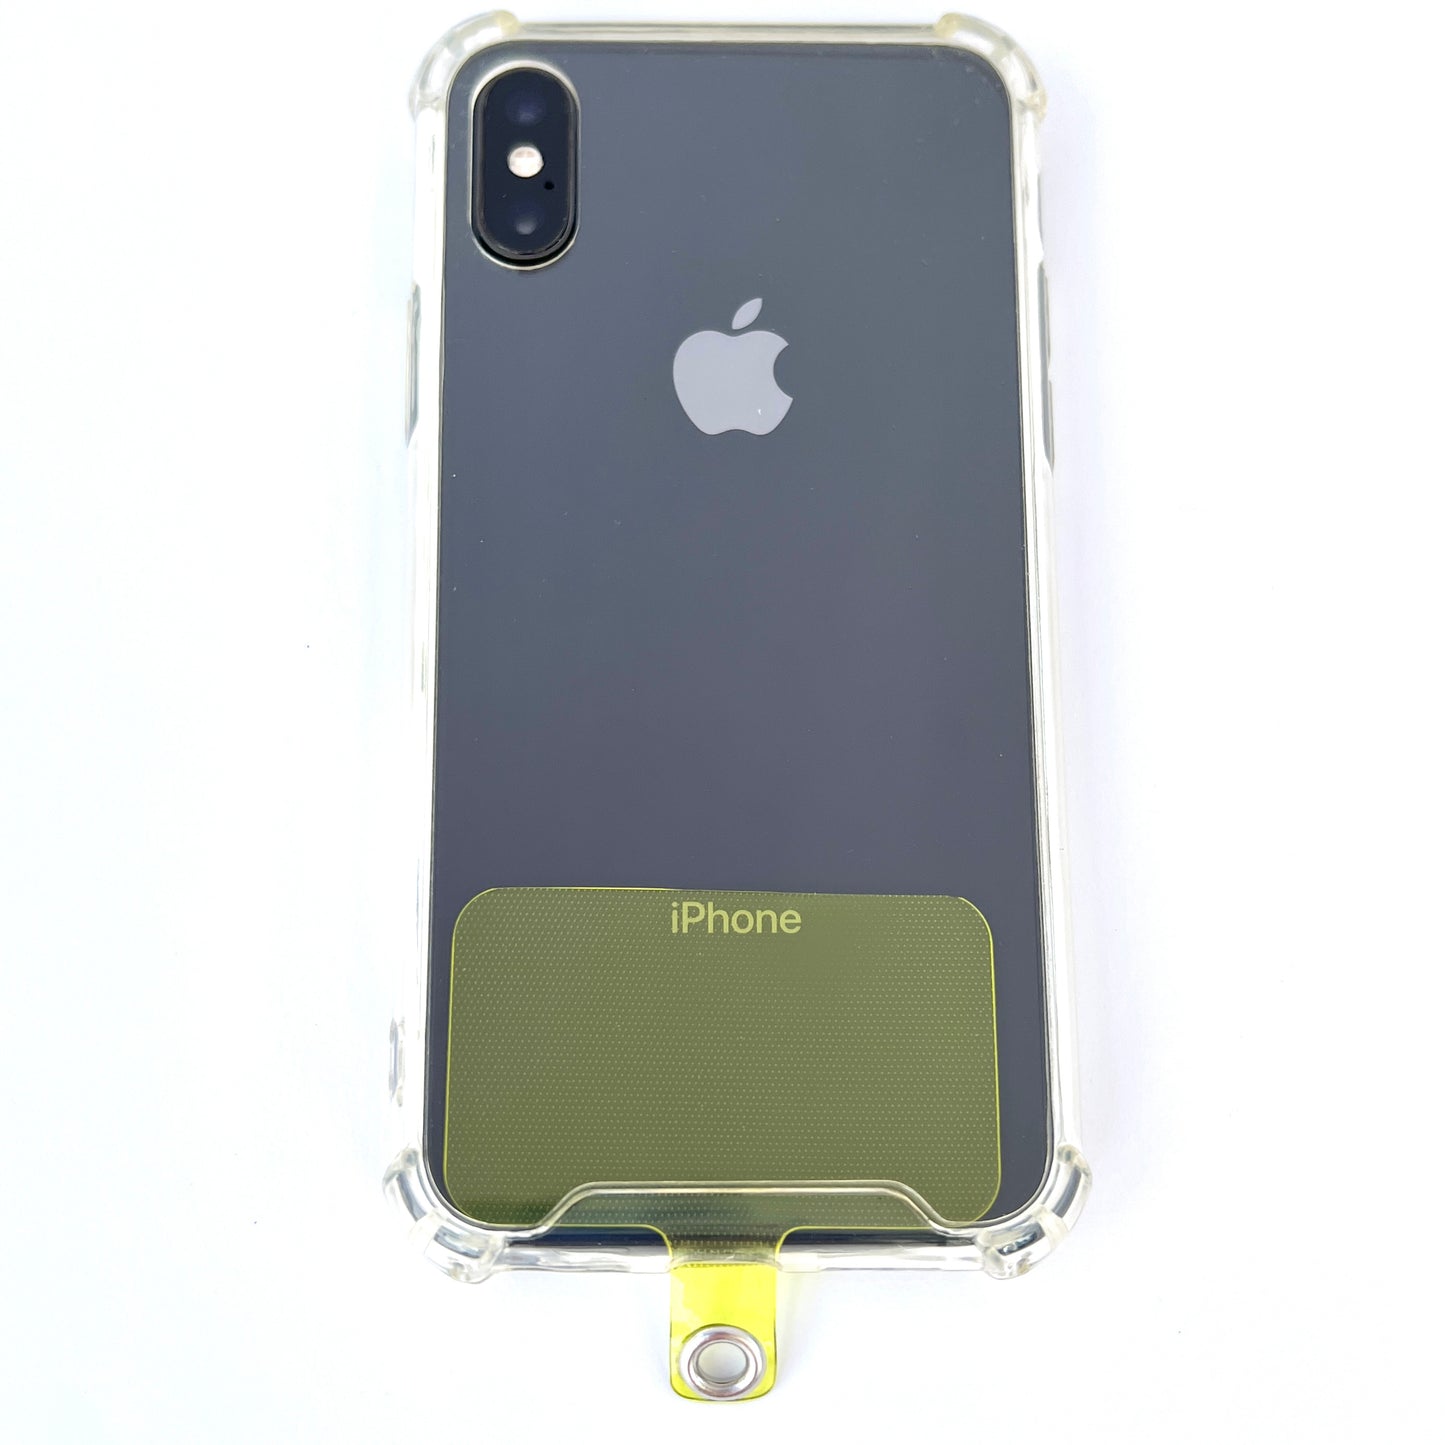 Yellow Transparent Phone Connector Patch